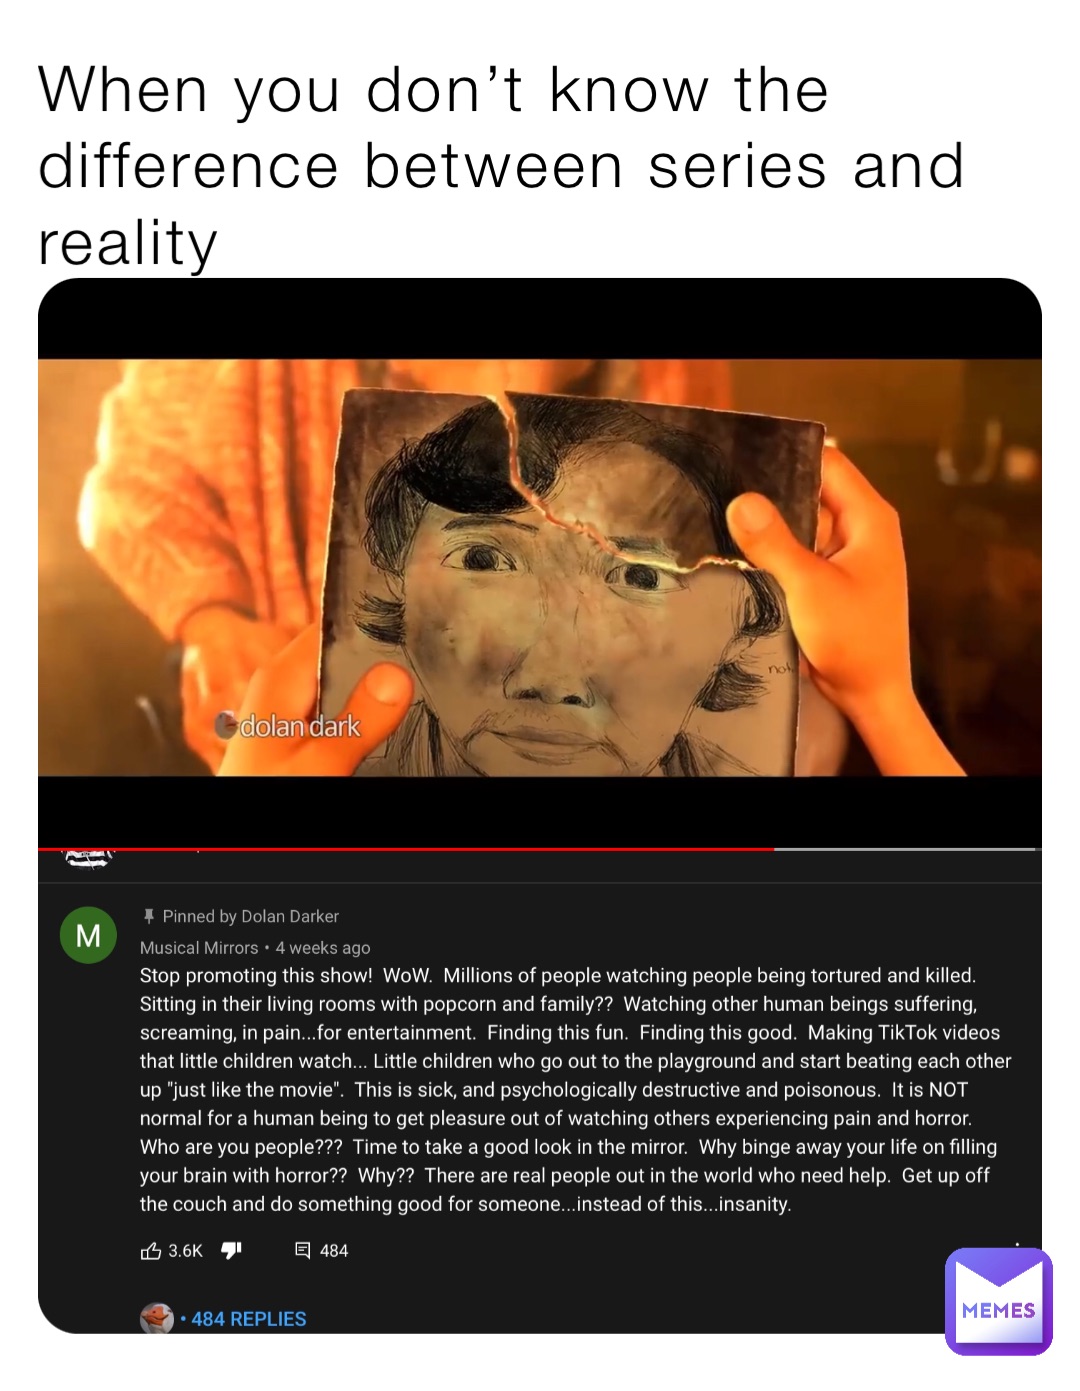 When you don’t know the difference between series and reality